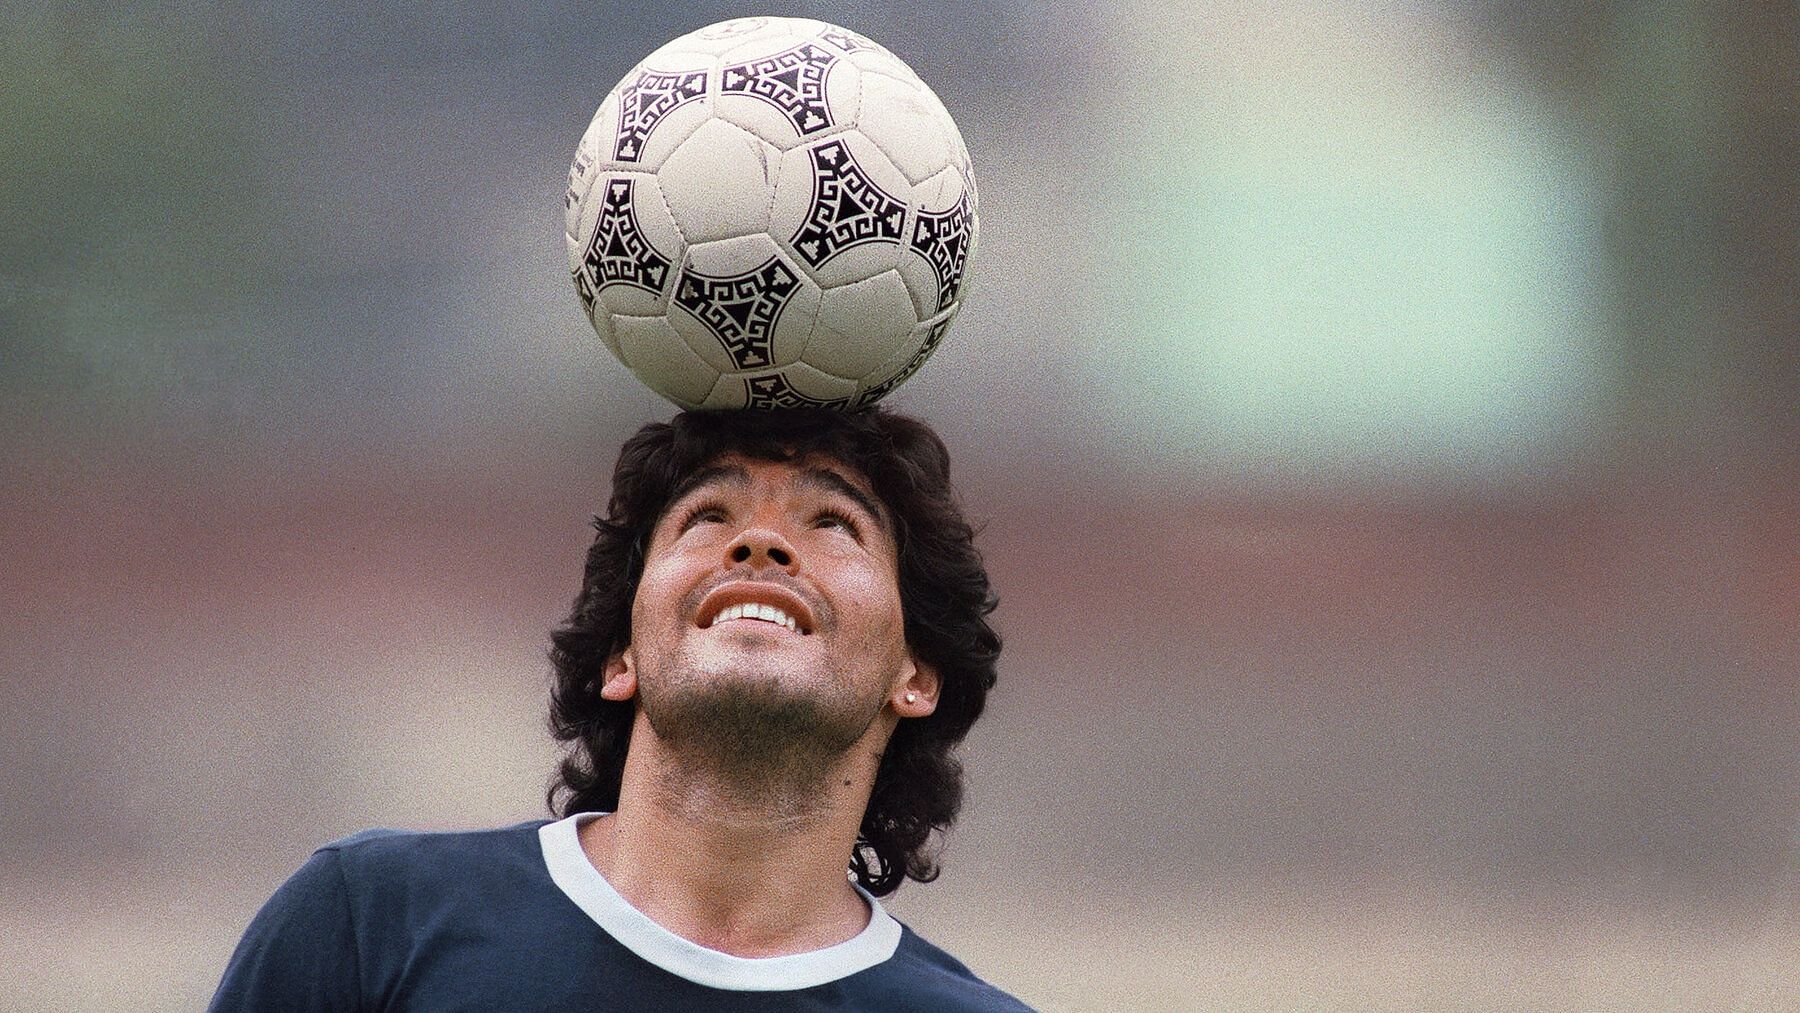 Diego Maradona passed away at the age of 60.